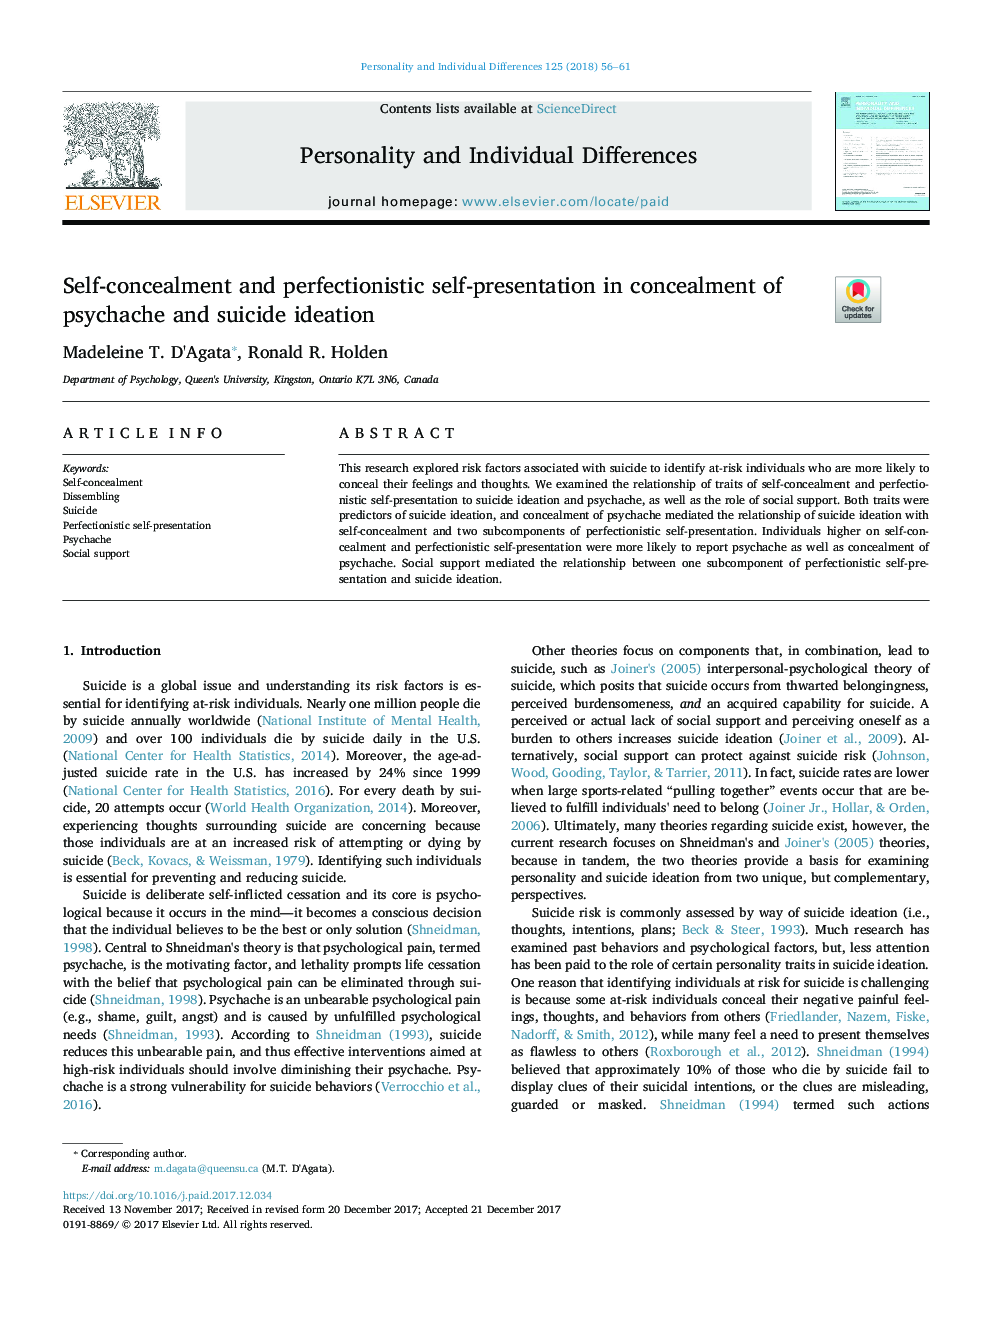 Self-concealment and perfectionistic self-presentation in concealment of psychache and suicide ideation